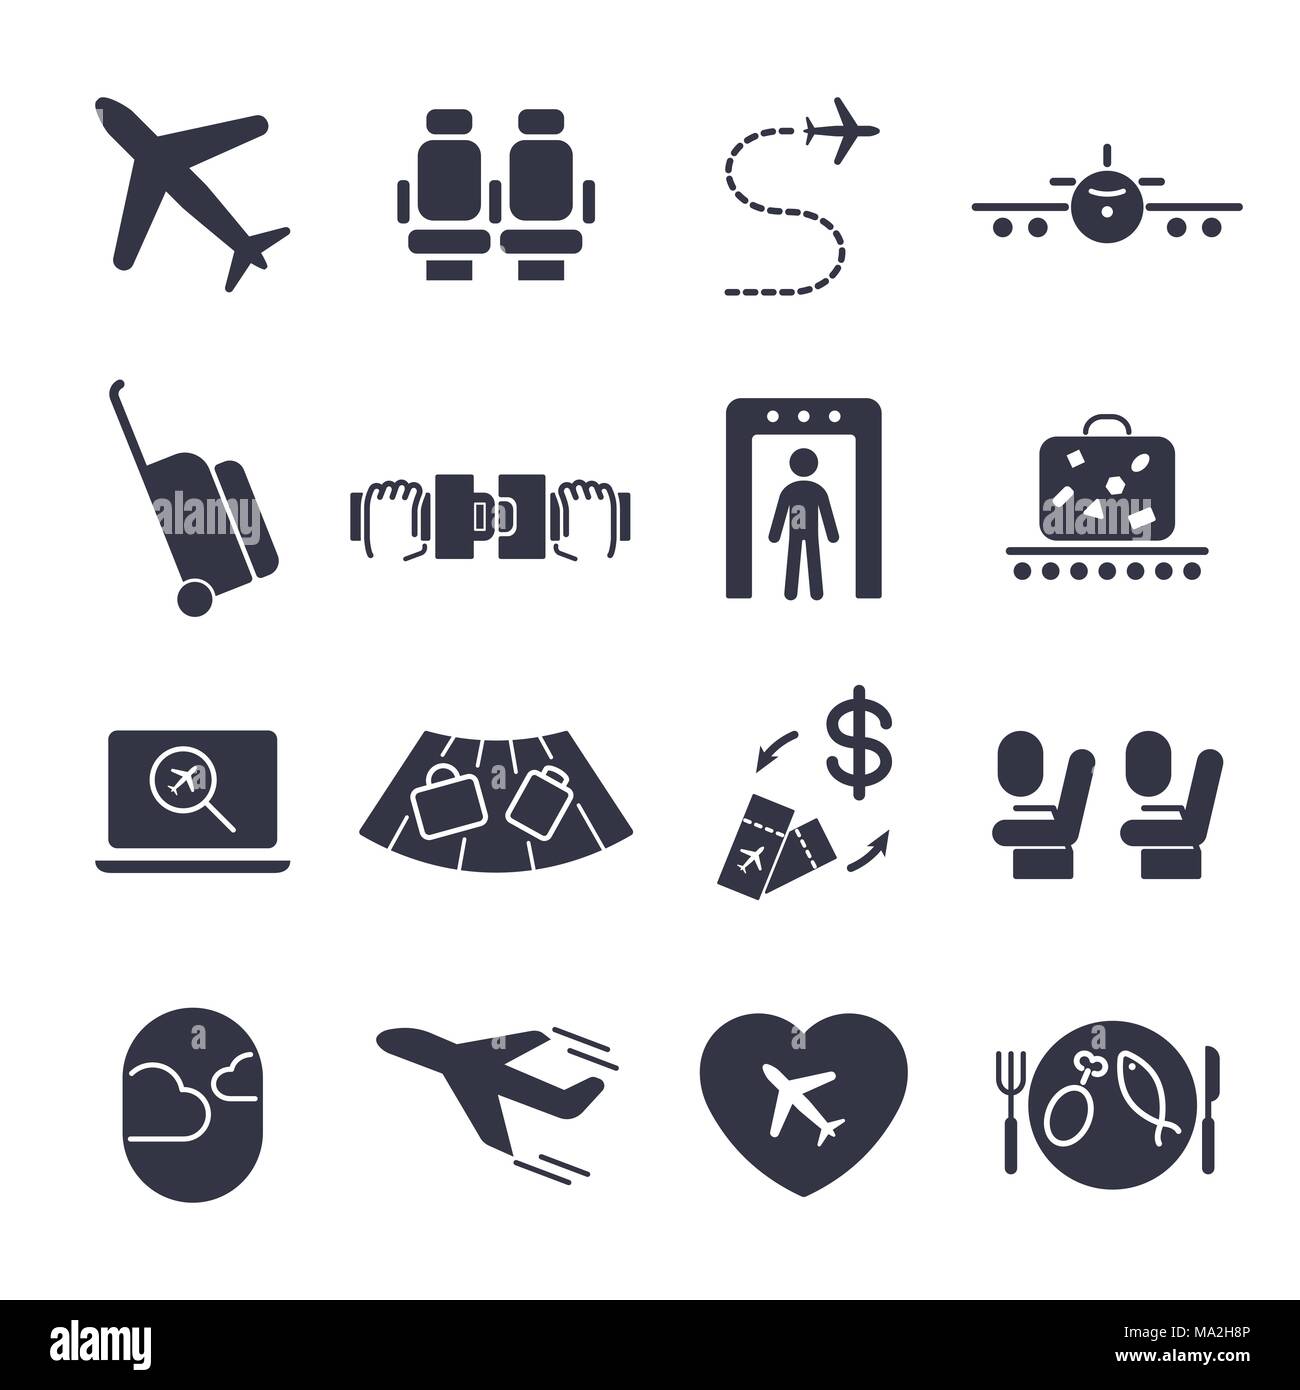 Airport icon set, airport management icons, aerial transportation icons ...